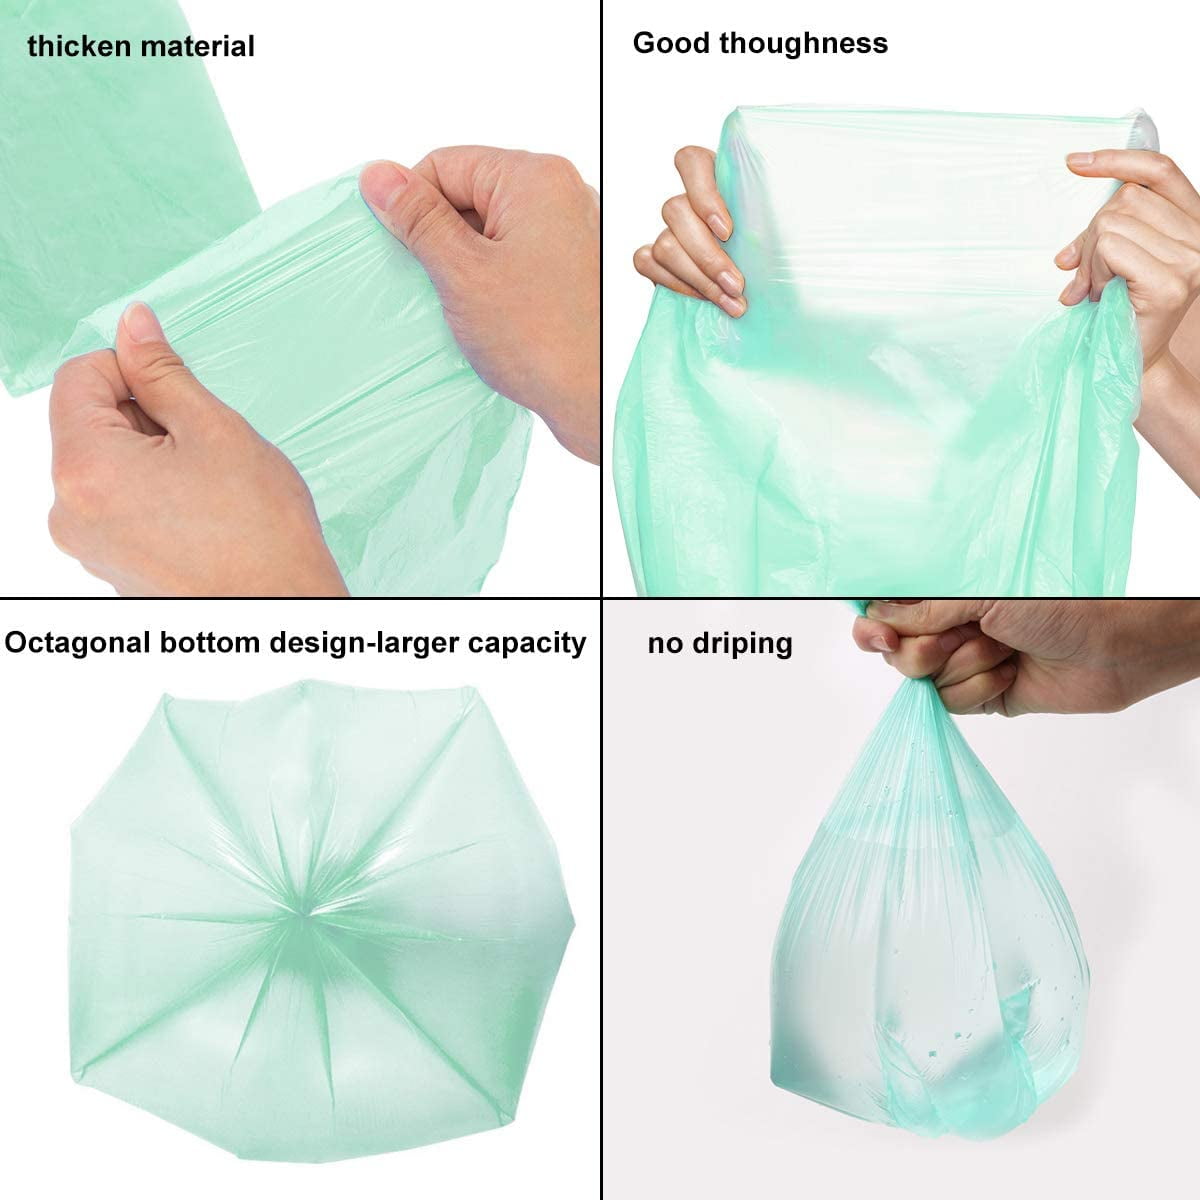 XIQIYY 1.2 Gallon Small Trash Bags, 5L Clear Bag Trash Can Colorful Garbage  Bags,60 Count for Bedroom,Kitchen,Bathroom,Toilet,Office